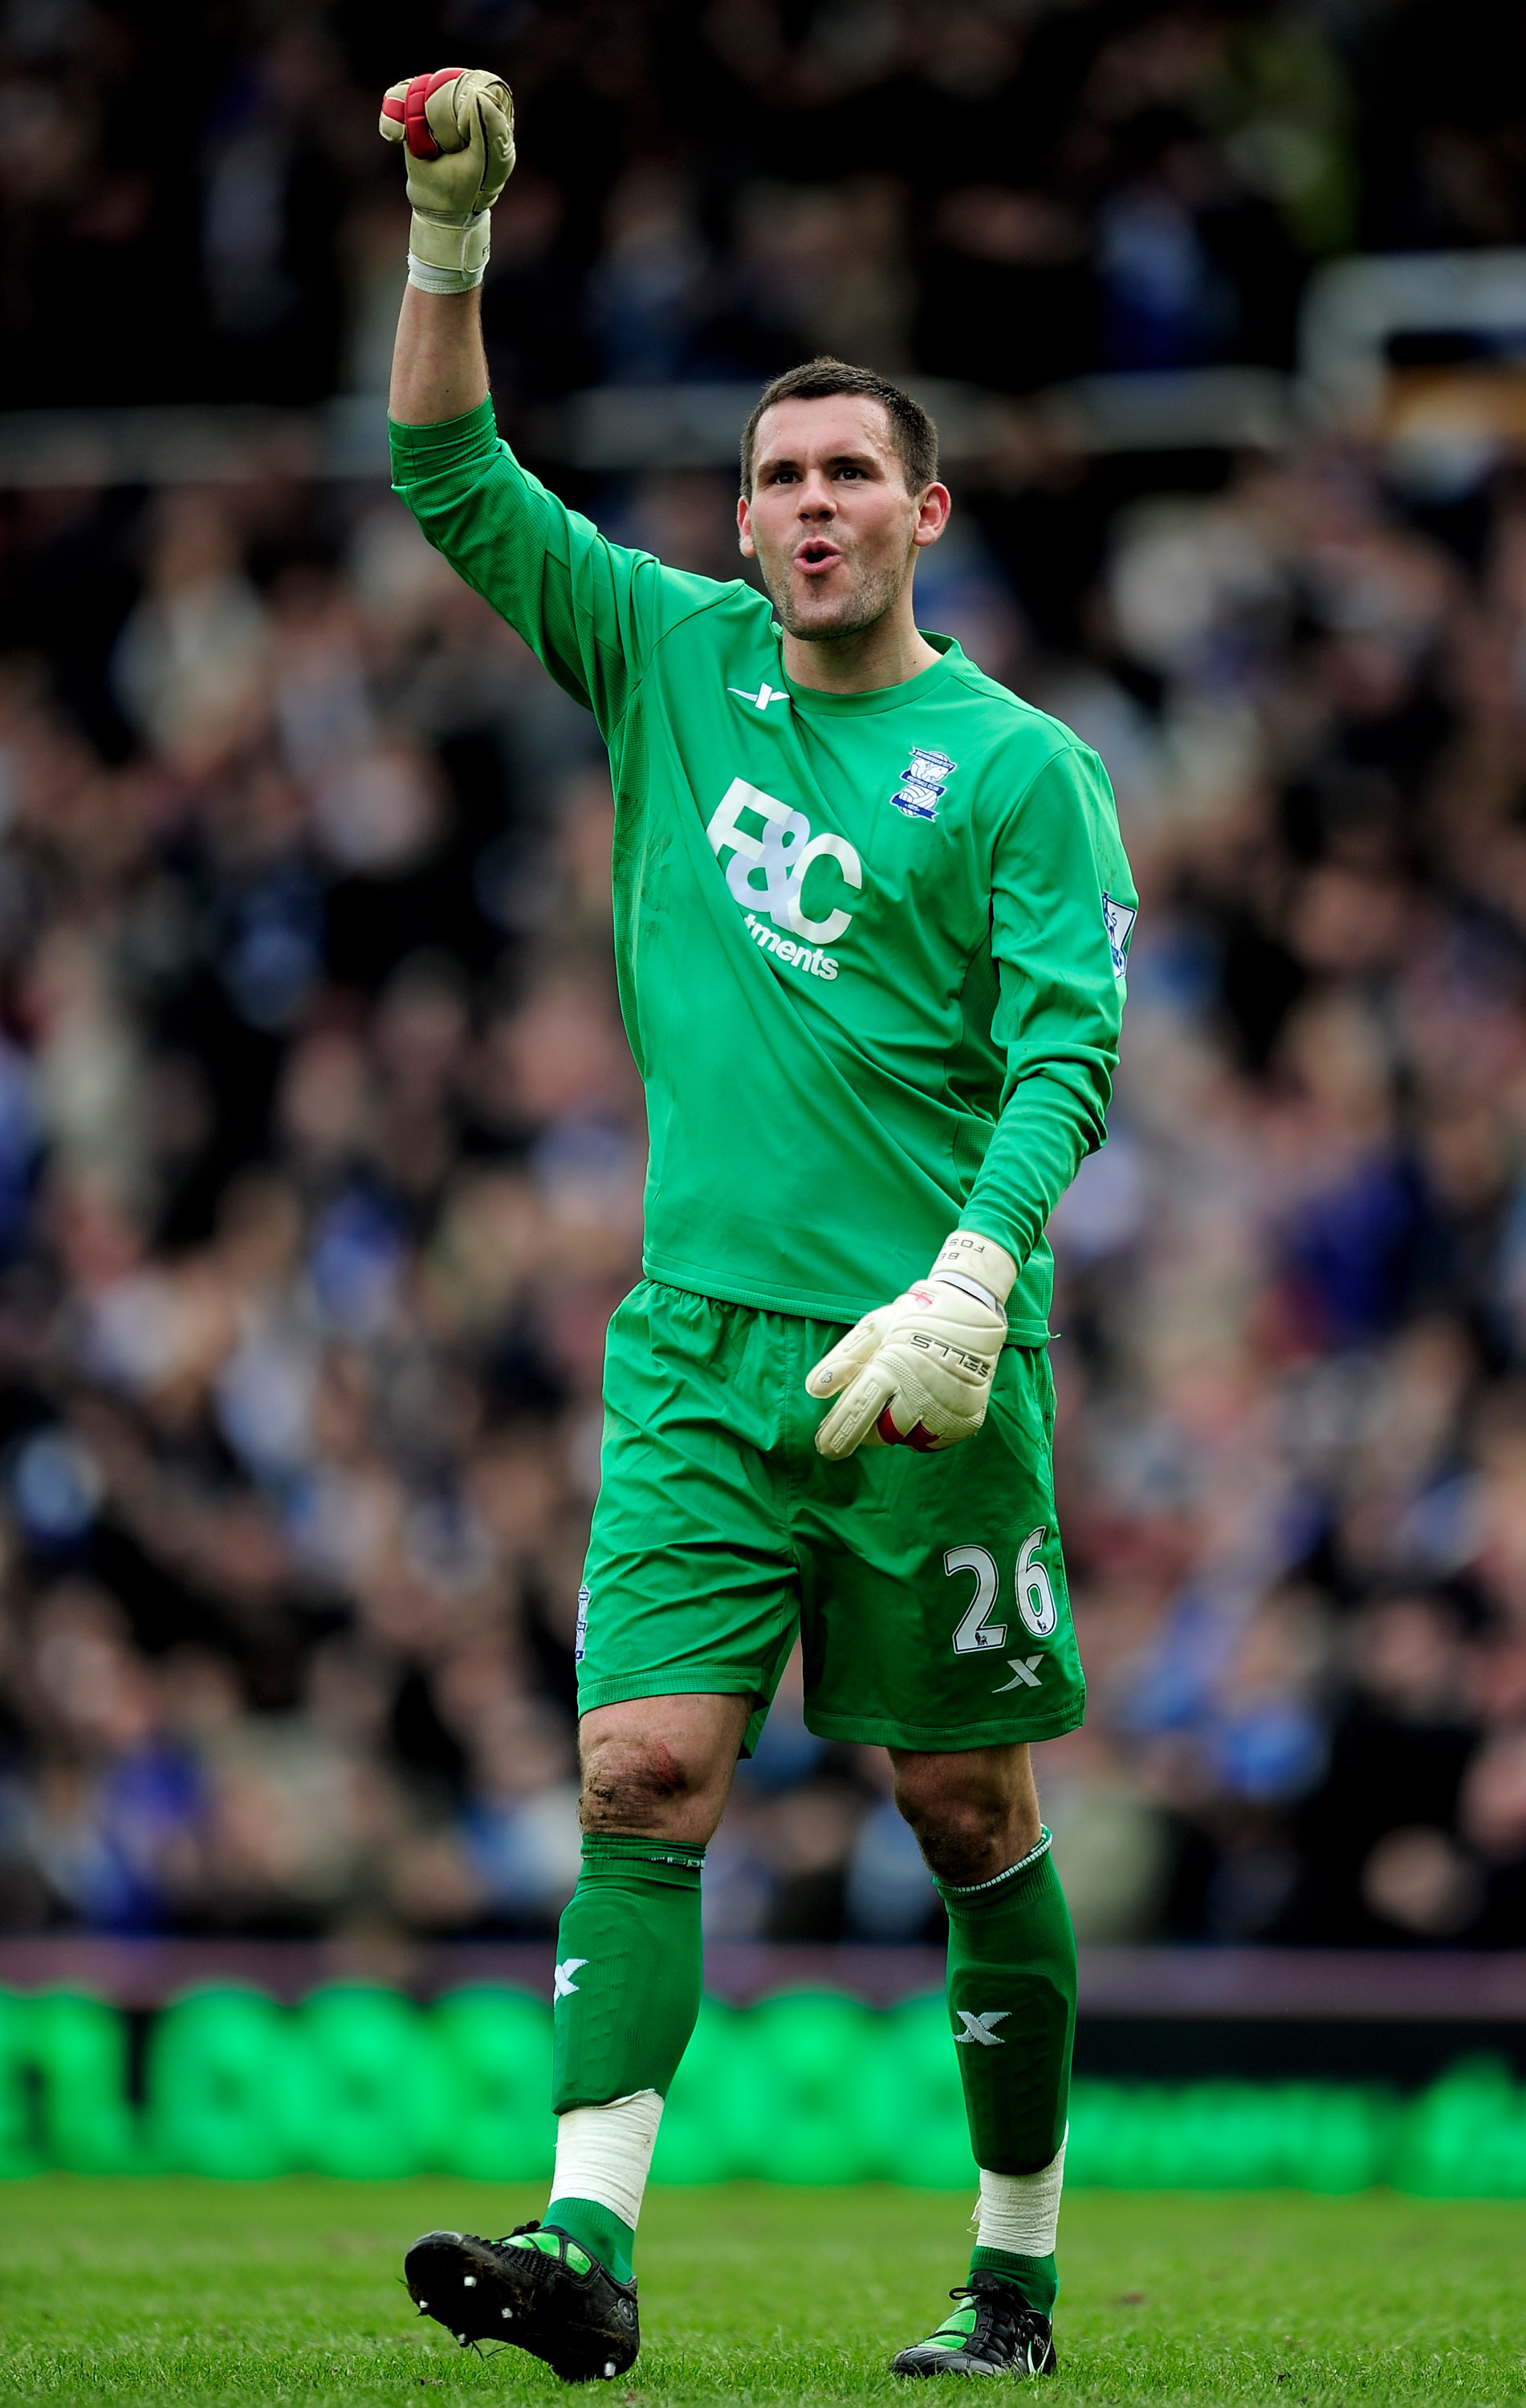 BIRMINGHAM, ENGLAND - MARCH 12:  Ben Foster of Birmingham City gestures during the FA Cup sponsored by E.On Sixth Round match between Birmingham City and Bolton Wanderers at St Andrews on March 12, 2011 in Birmingham, England.  (Photo by Jamie McDonald/Ge